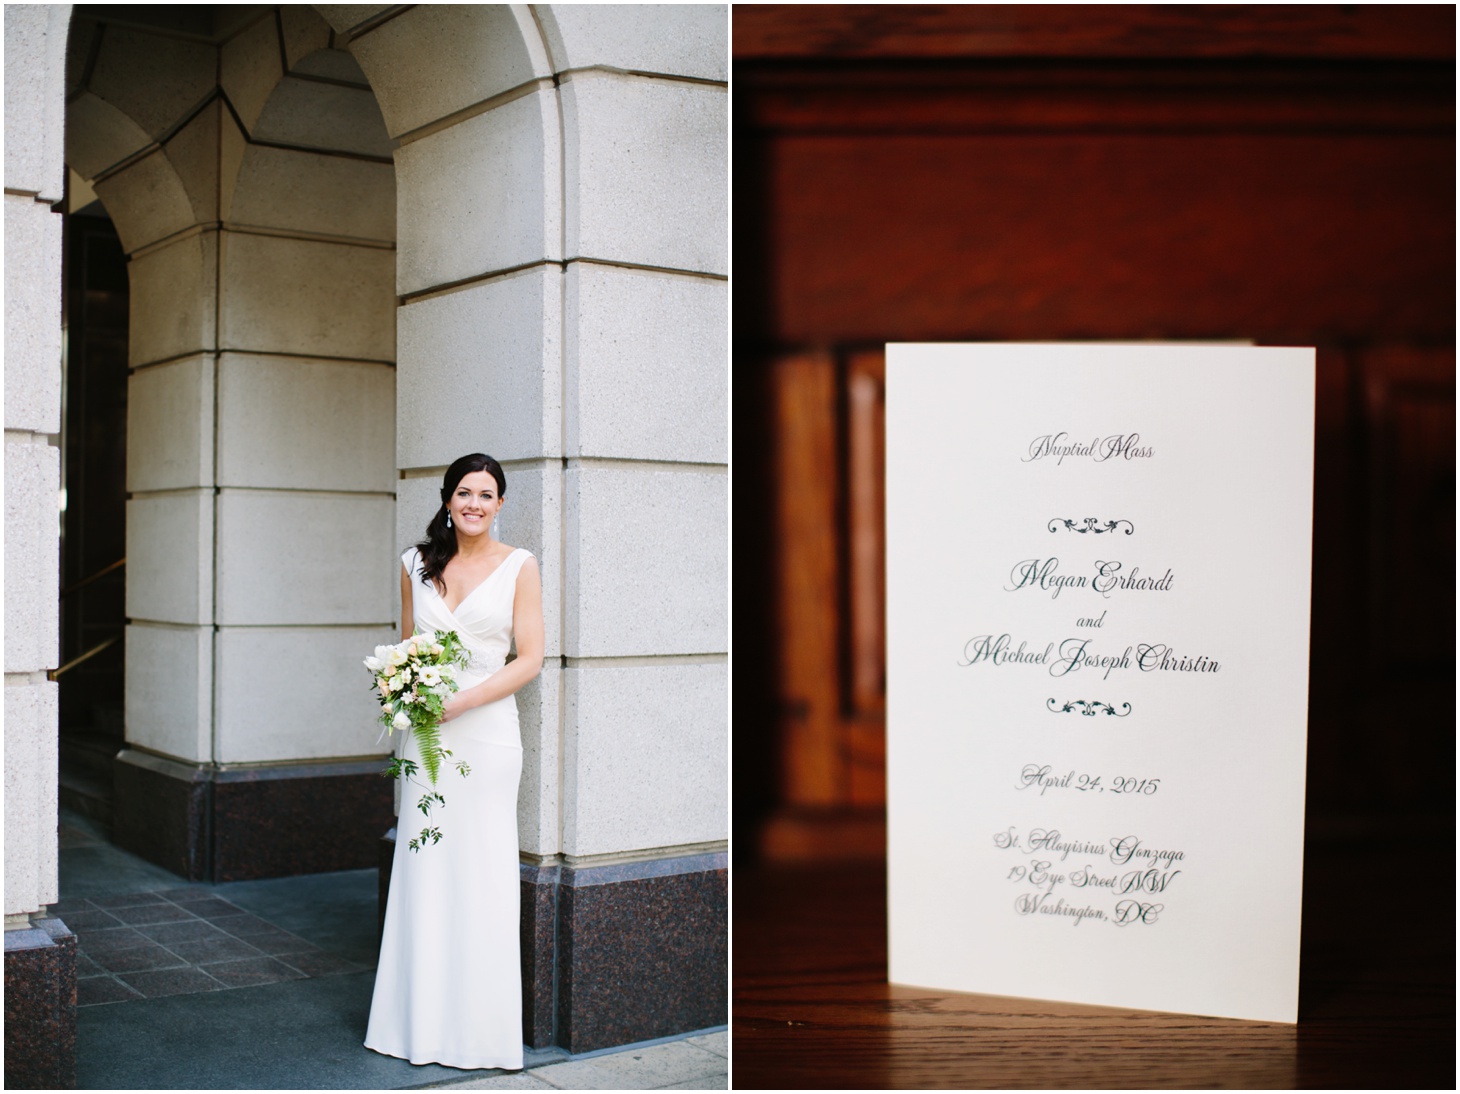 Mikey & Megan, Downtown DC Wedding at National Museum of Women in the Arts by Sarah Bradshaw Photography_0021.jpg